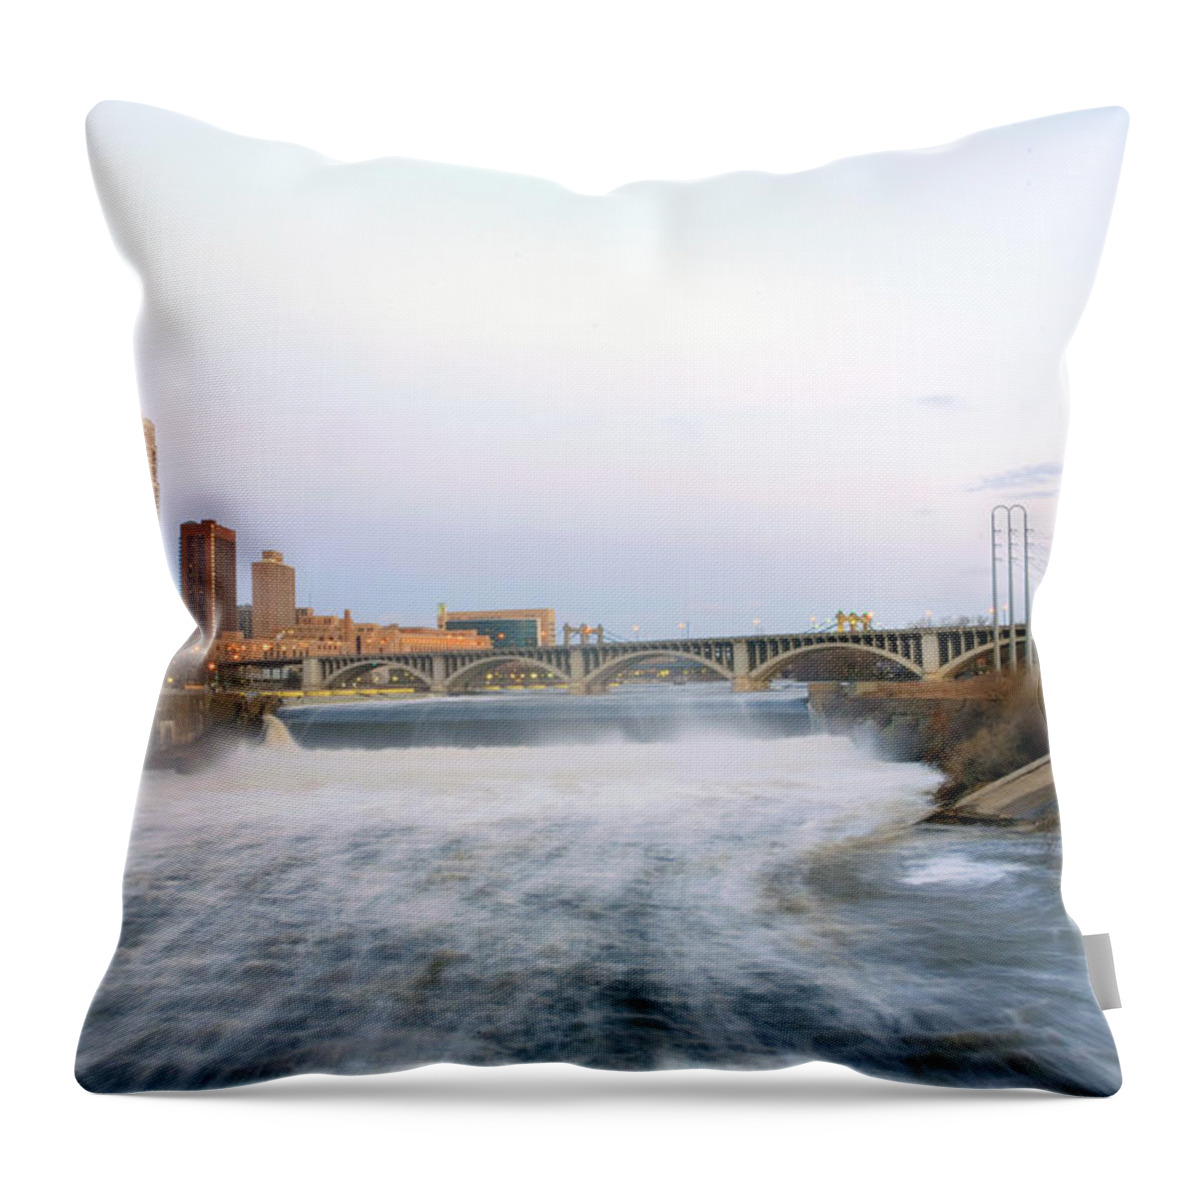 Built Structure Throw Pillow featuring the photograph Ford Lock And Dam In Minneapolis by Bryant Scannell